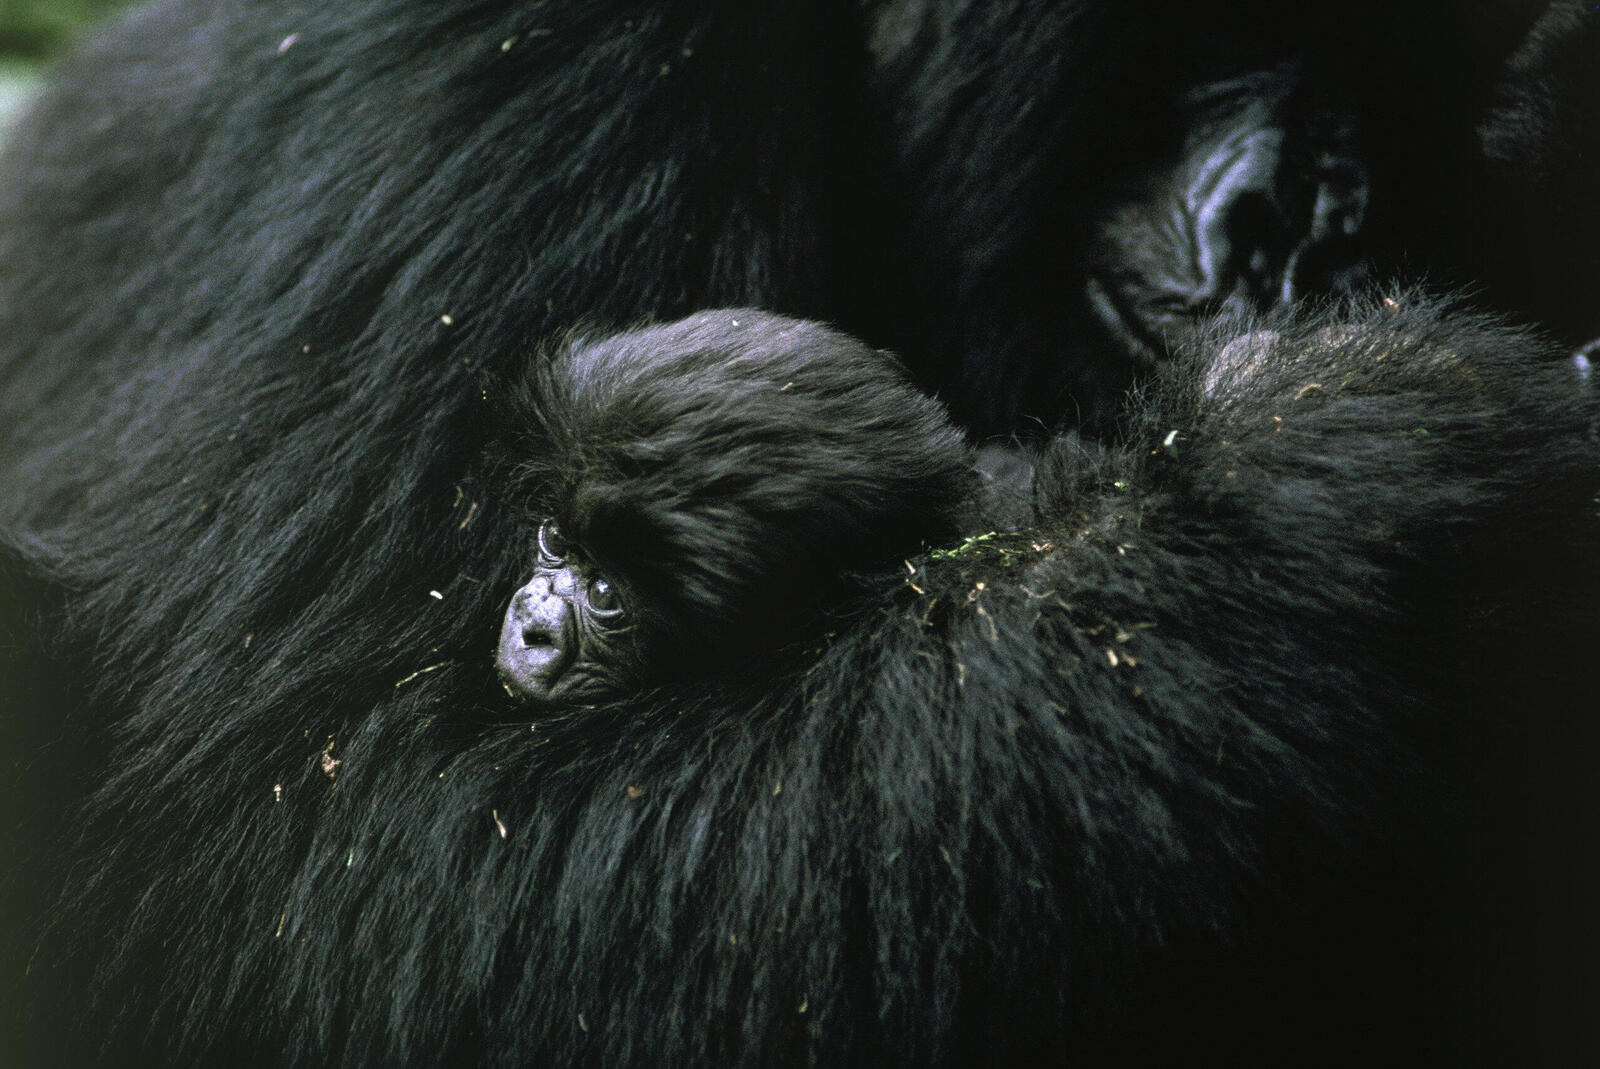 Young gorilla and its mother